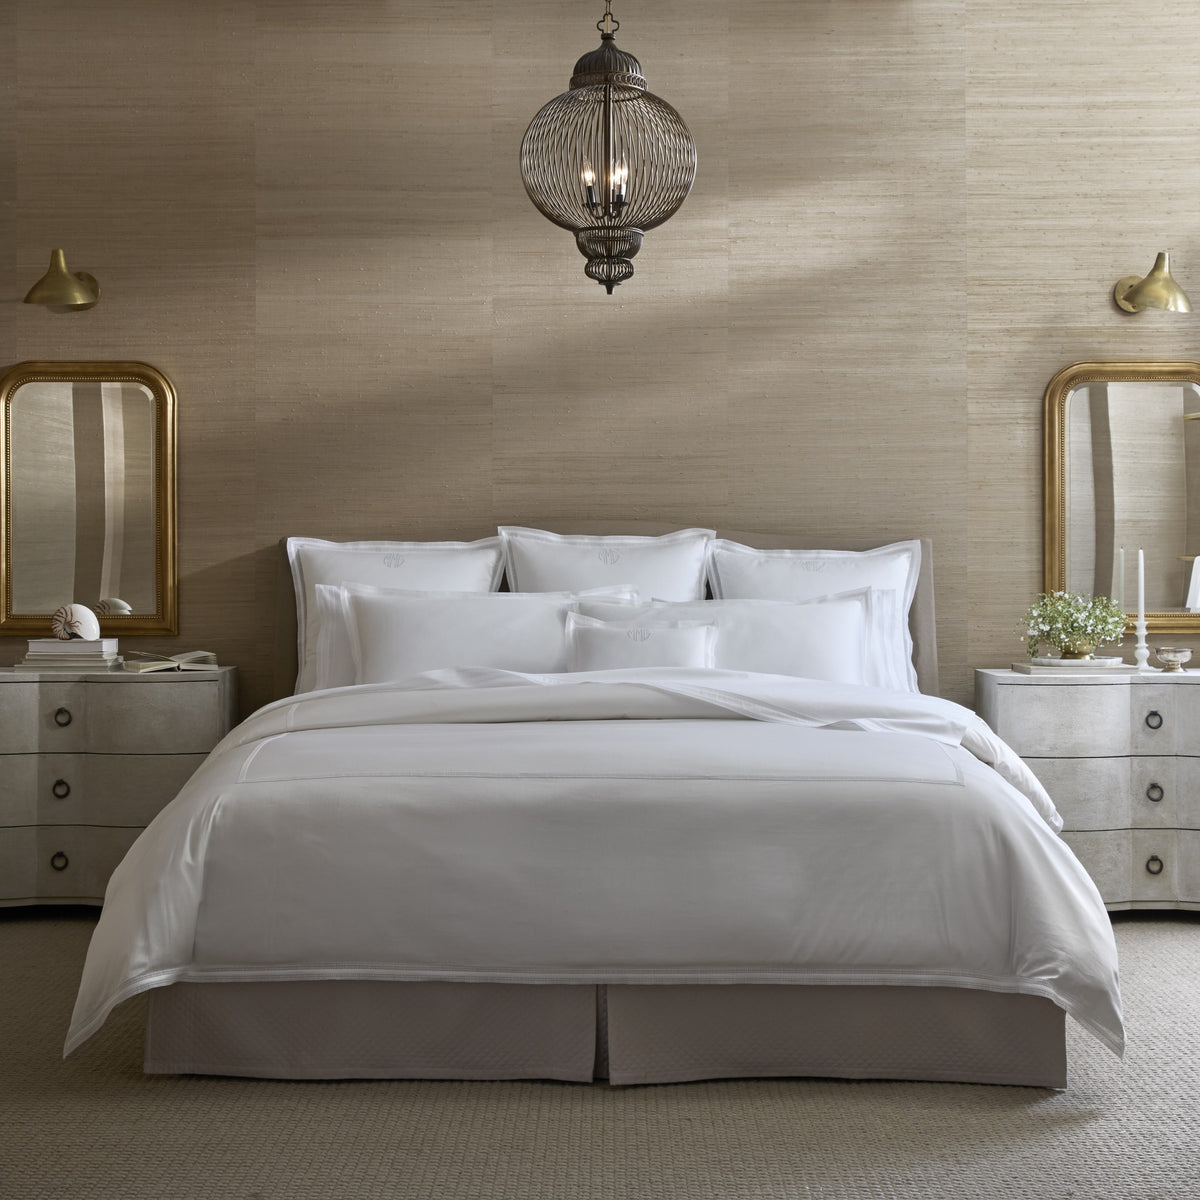 Full Bed Dressed in Matouk Grace Bedding in White Color